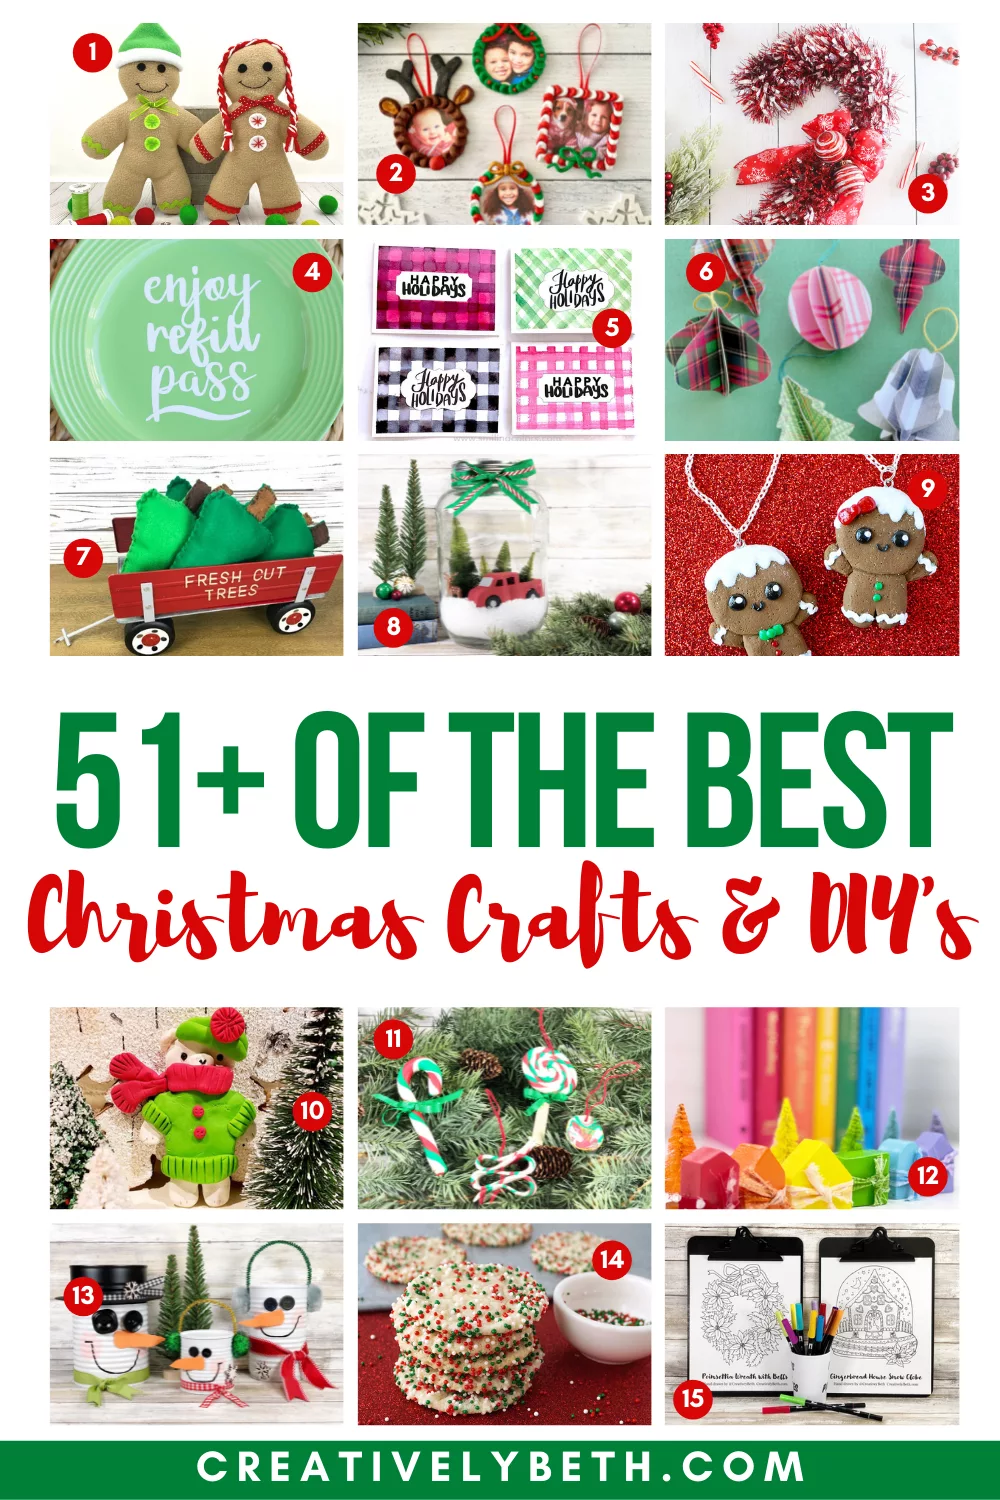 51+ of the BEST Christmas Crafts and Home Decor